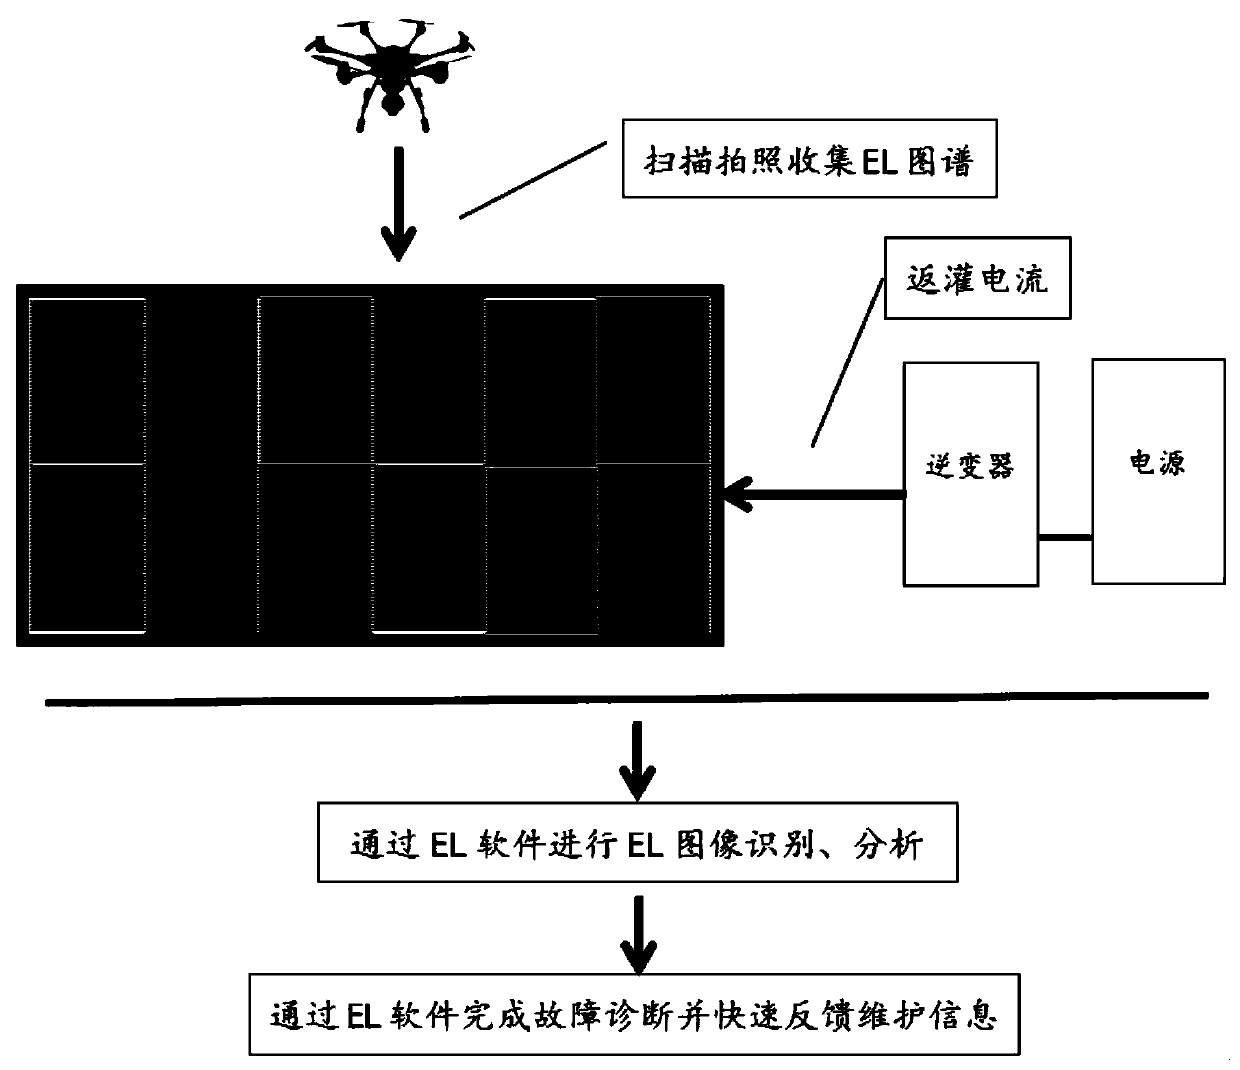 Method for carrying out EL (Electroluminescence) real-time online atlas collection, analysis and diagnosis on photovoltaic cell module by applying unmanned aerial vehicle and backward filling technology of inverter